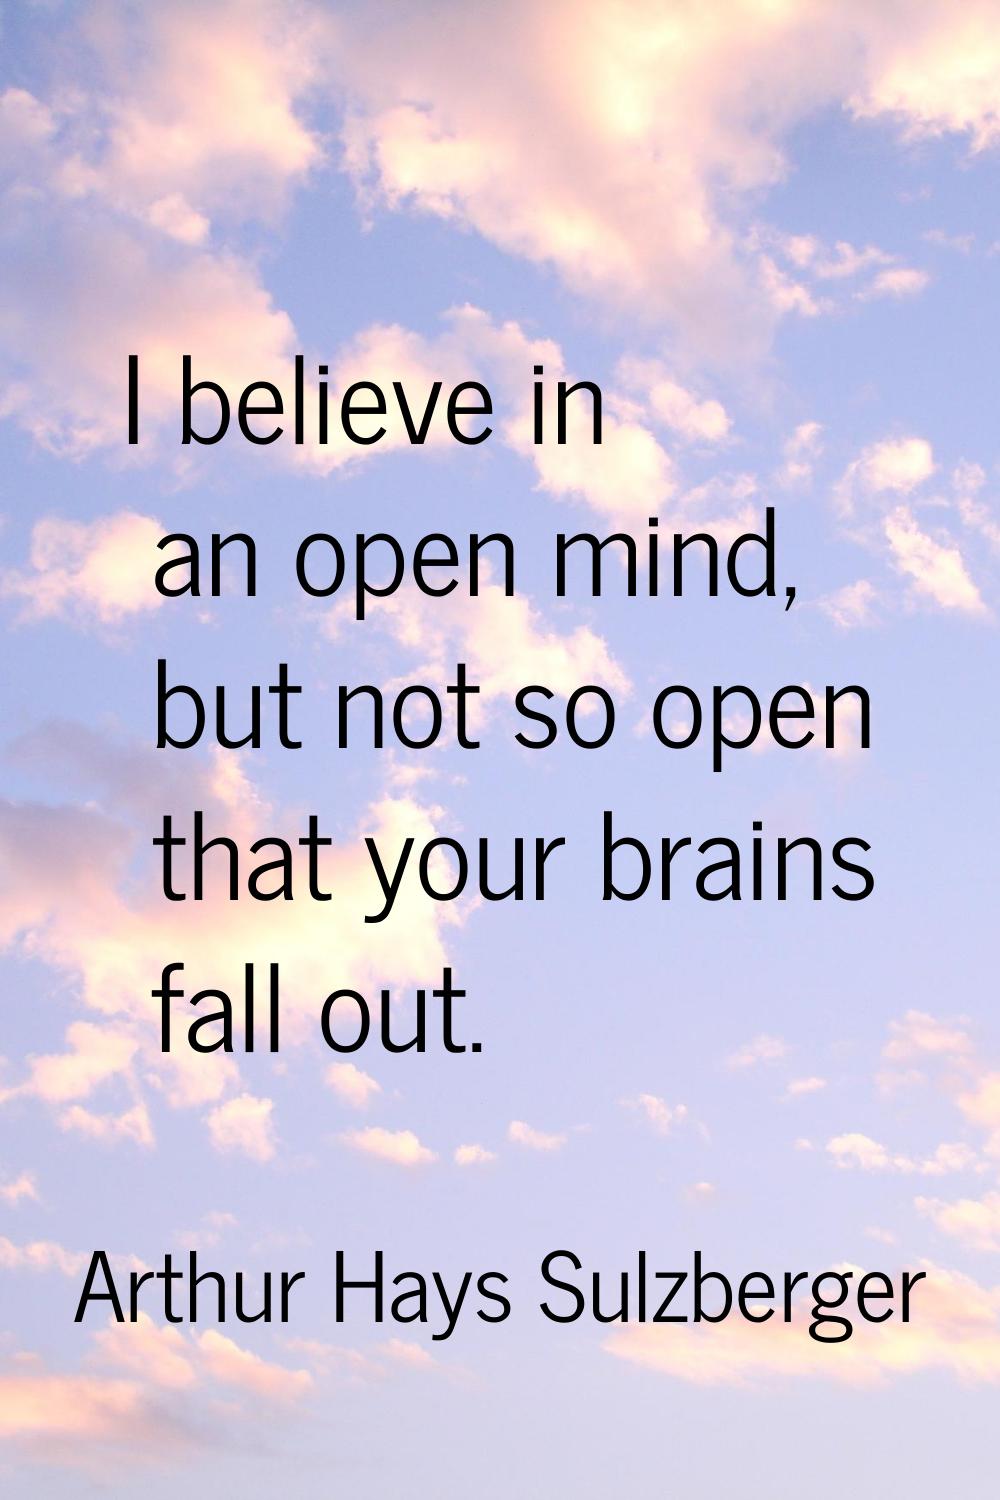 I believe in an open mind, but not so open that your brains fall out.